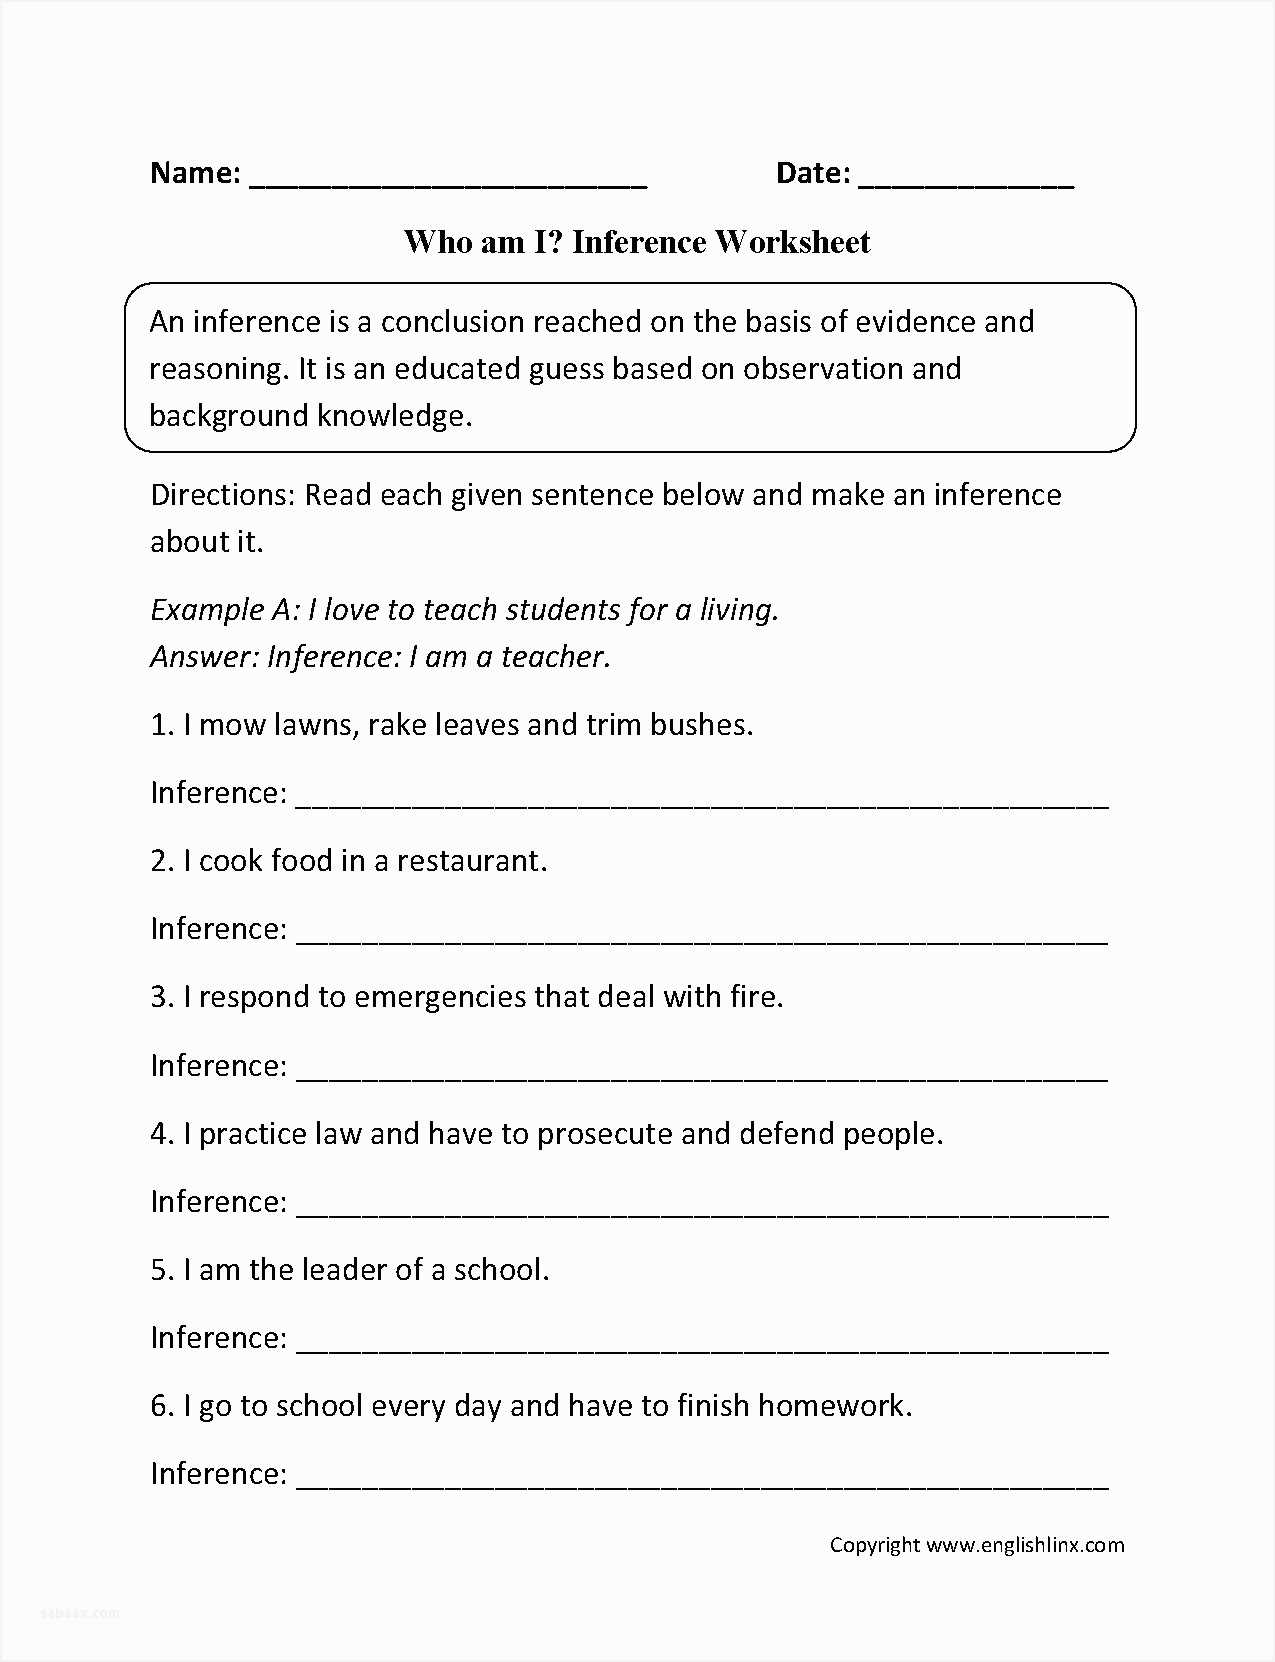 Inference Worksheets 3rd Grade or Inspirational Inference Worksheets – Sabaax